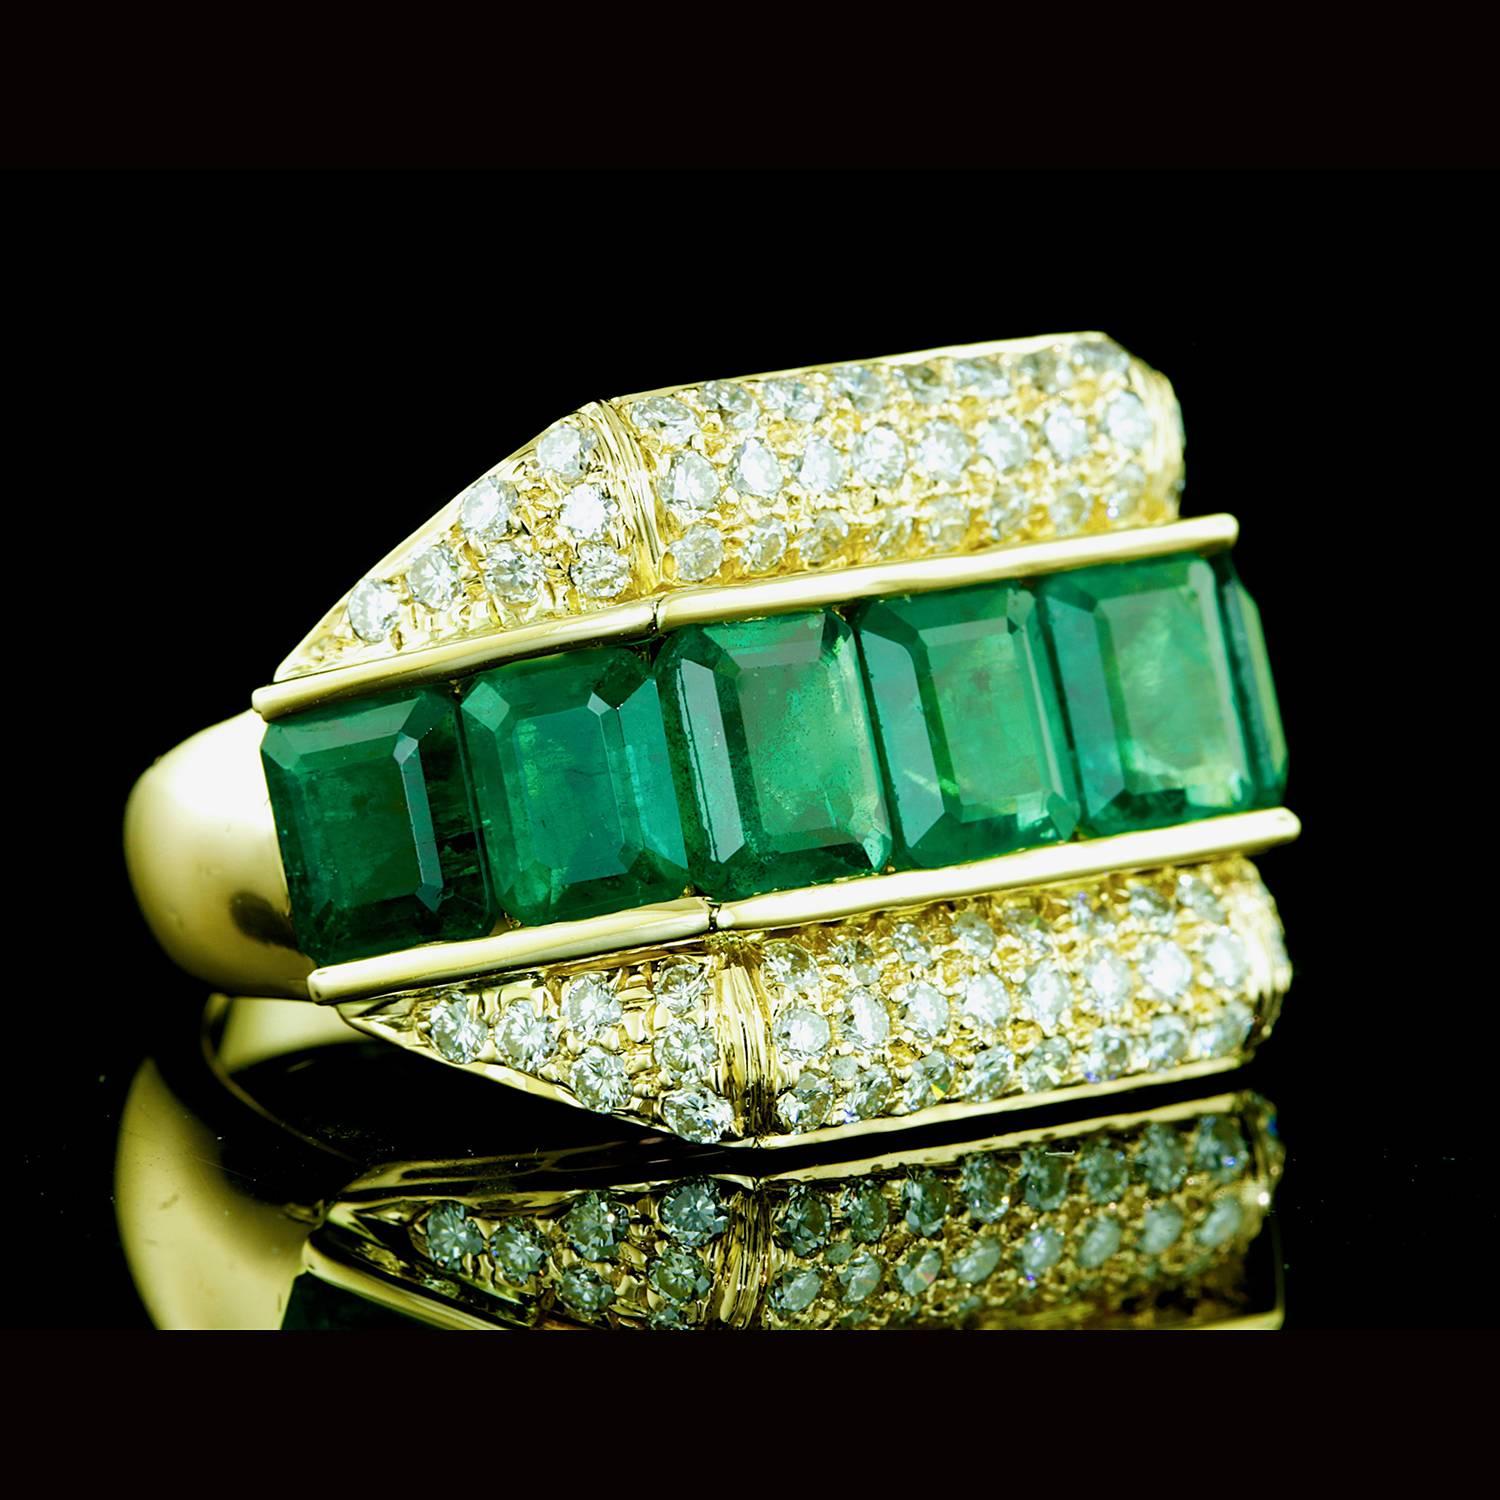 18k Ring with 7 emerald cut emeralds weighing approximately 7.00 carats and 76 round brilliant diamonds weighing approximately 1.50 carats. 11.82g